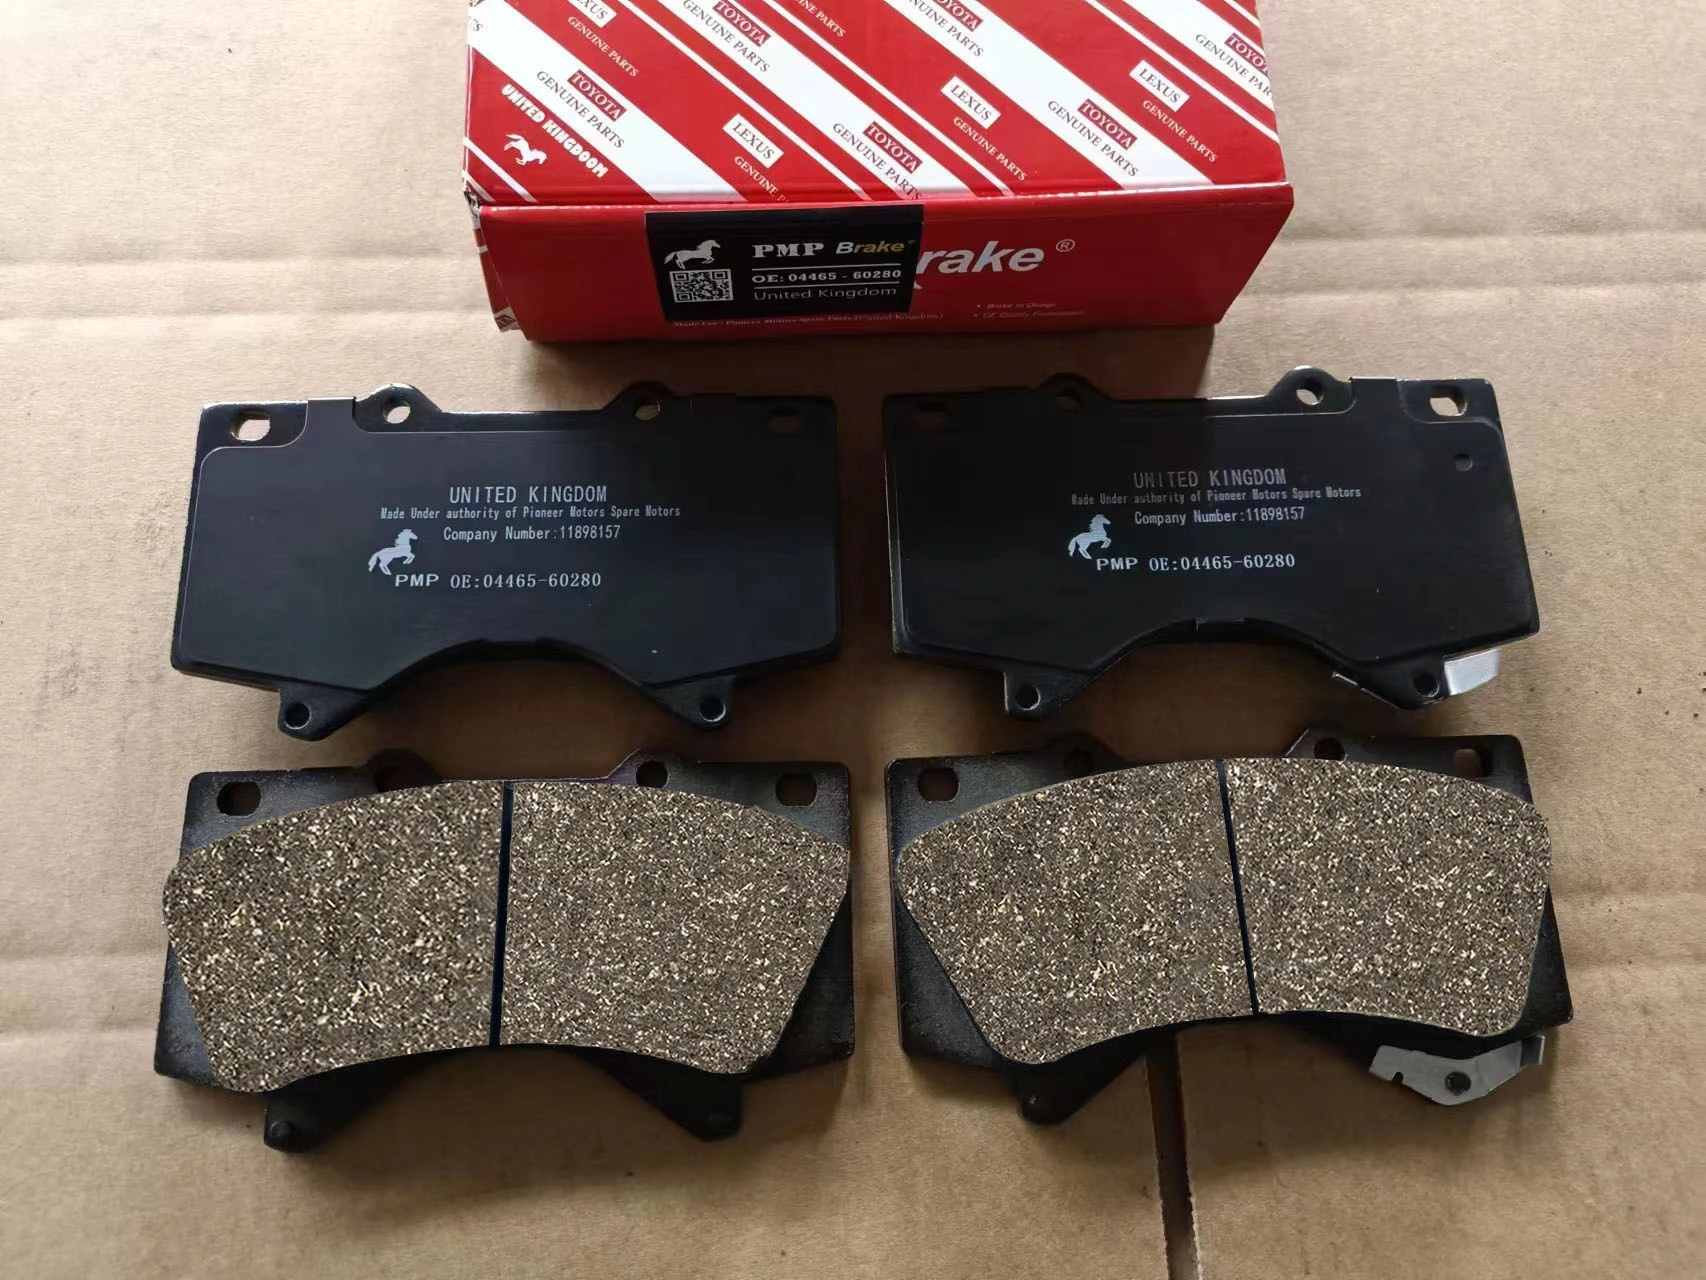 High-quality semi metallic brake pads tailored for Toyota Corolla, providing excellent stopping power.